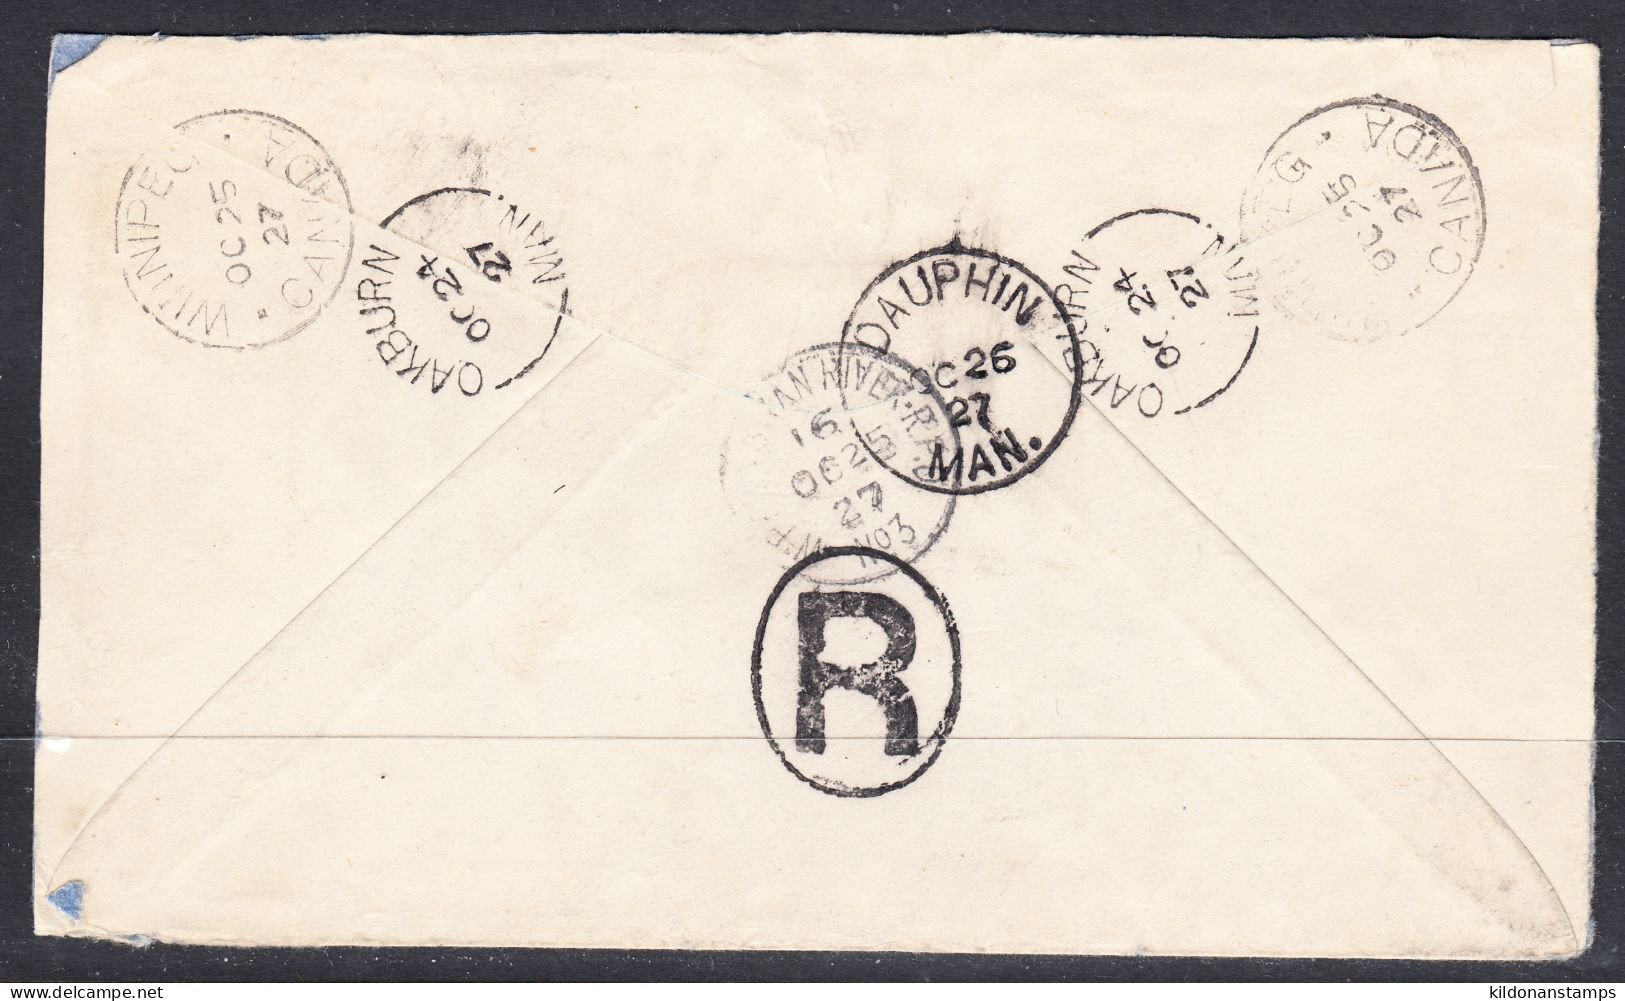 Canada Cover, Registered, Oakburn Manitoba, Oct 24 1927, A3 Broken Circle Postmark, To Dominion Lands Office (Dauphin) - Lettres & Documents